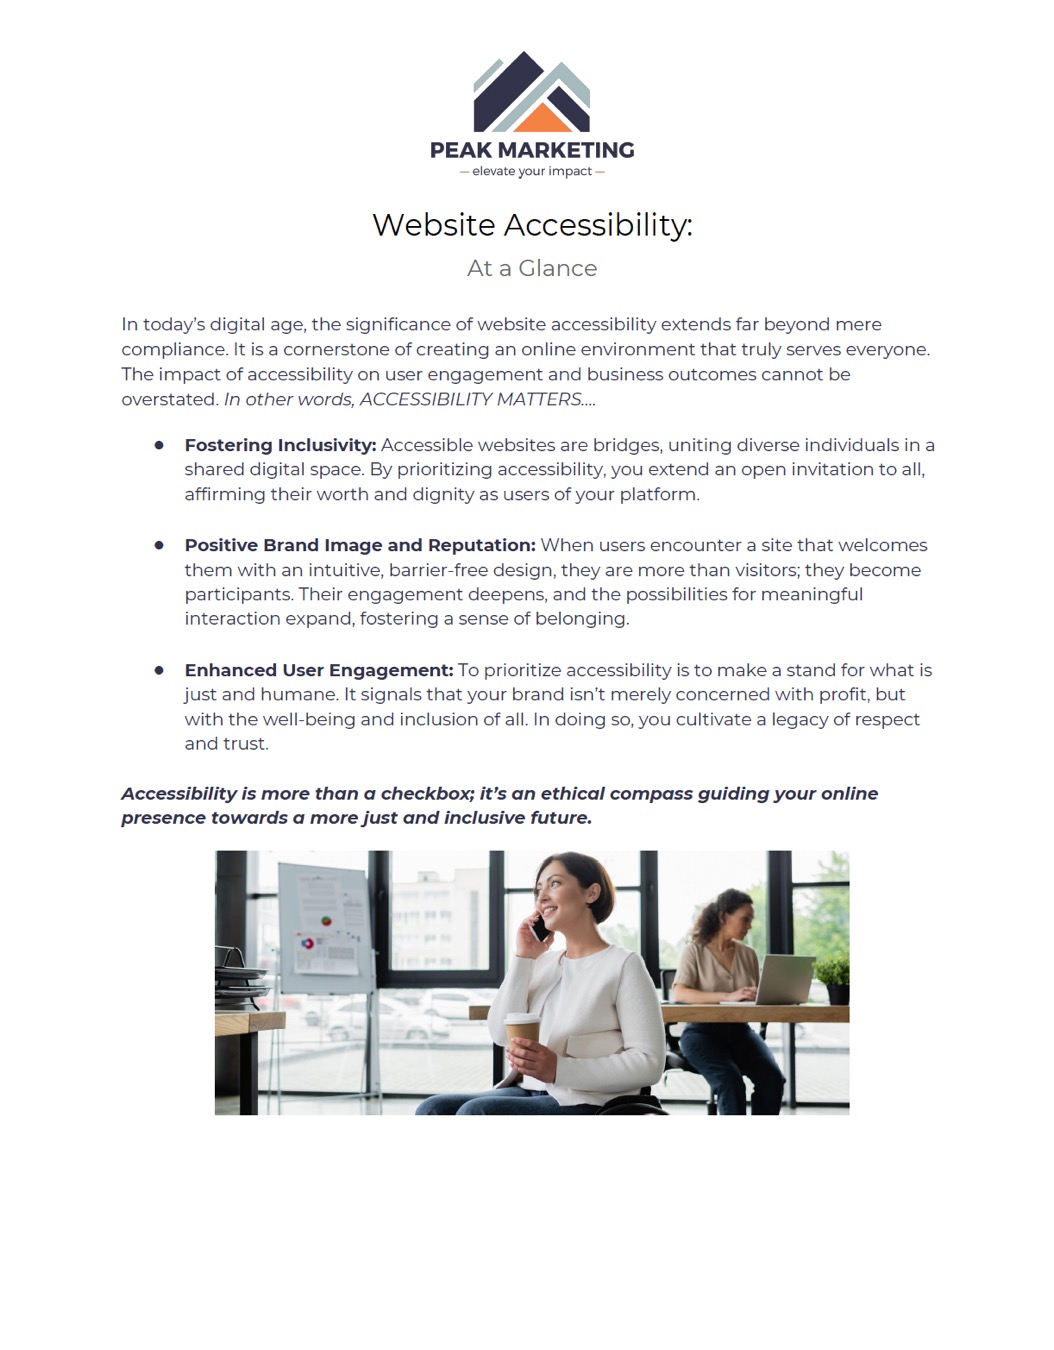 Website Accessibility - At a Glance